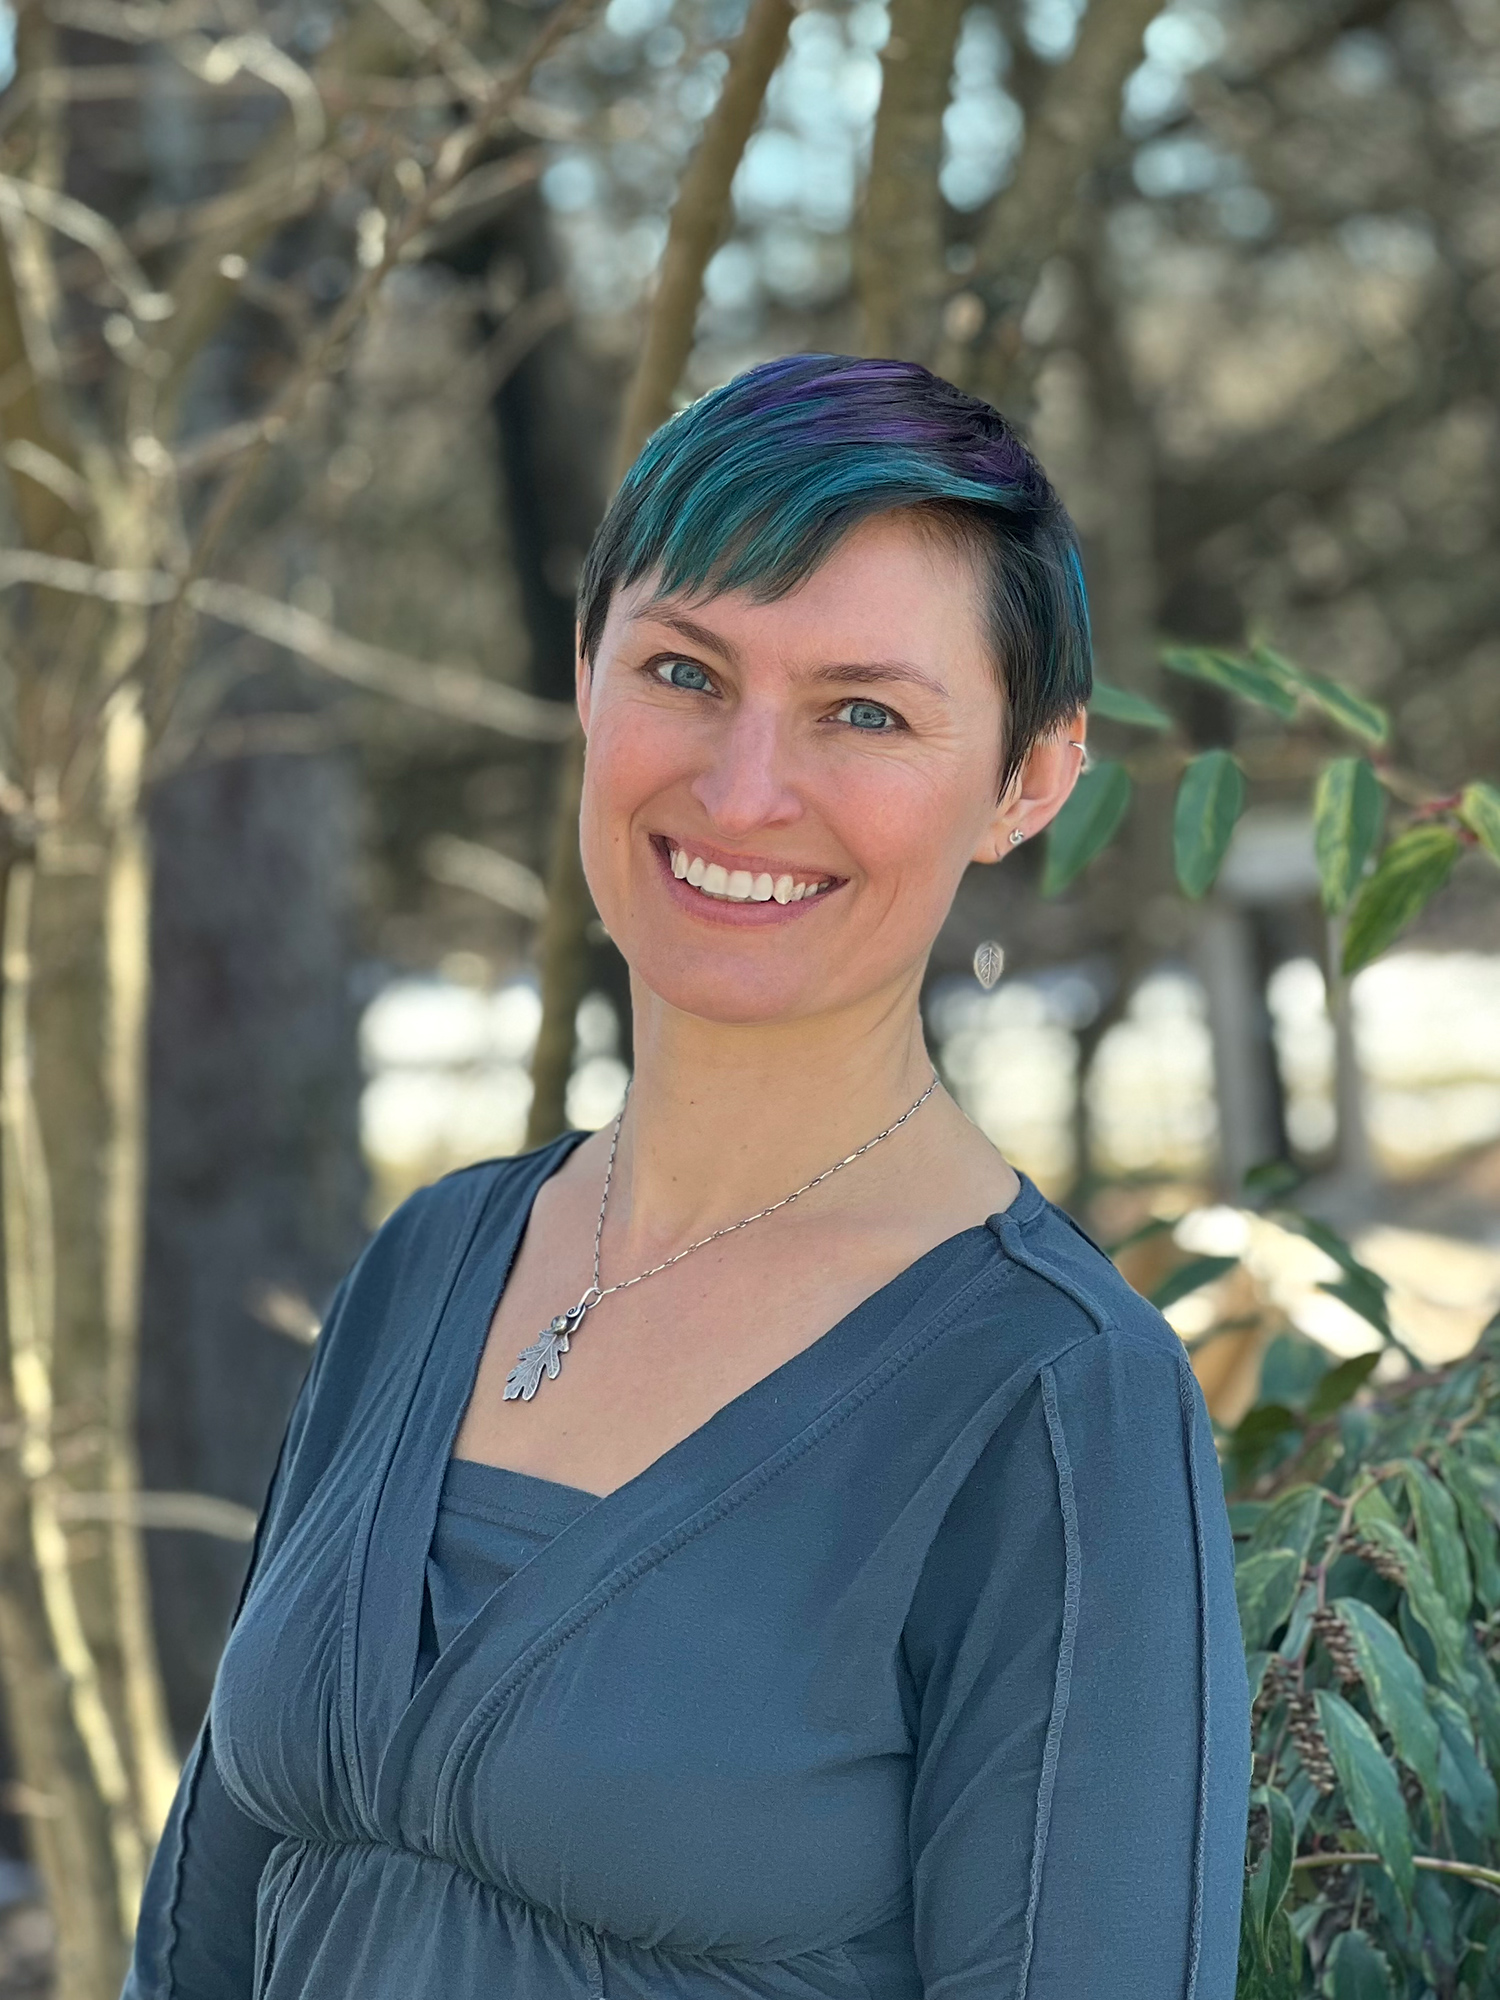 Author and illustrator Victoria K. Chapman stands outside by a stand of trees and smiles. She has a short pixie style haircut that has turquoise and purple in it, blue eyes, and light tan skin. She is wearing a grey long sleeve shirt.